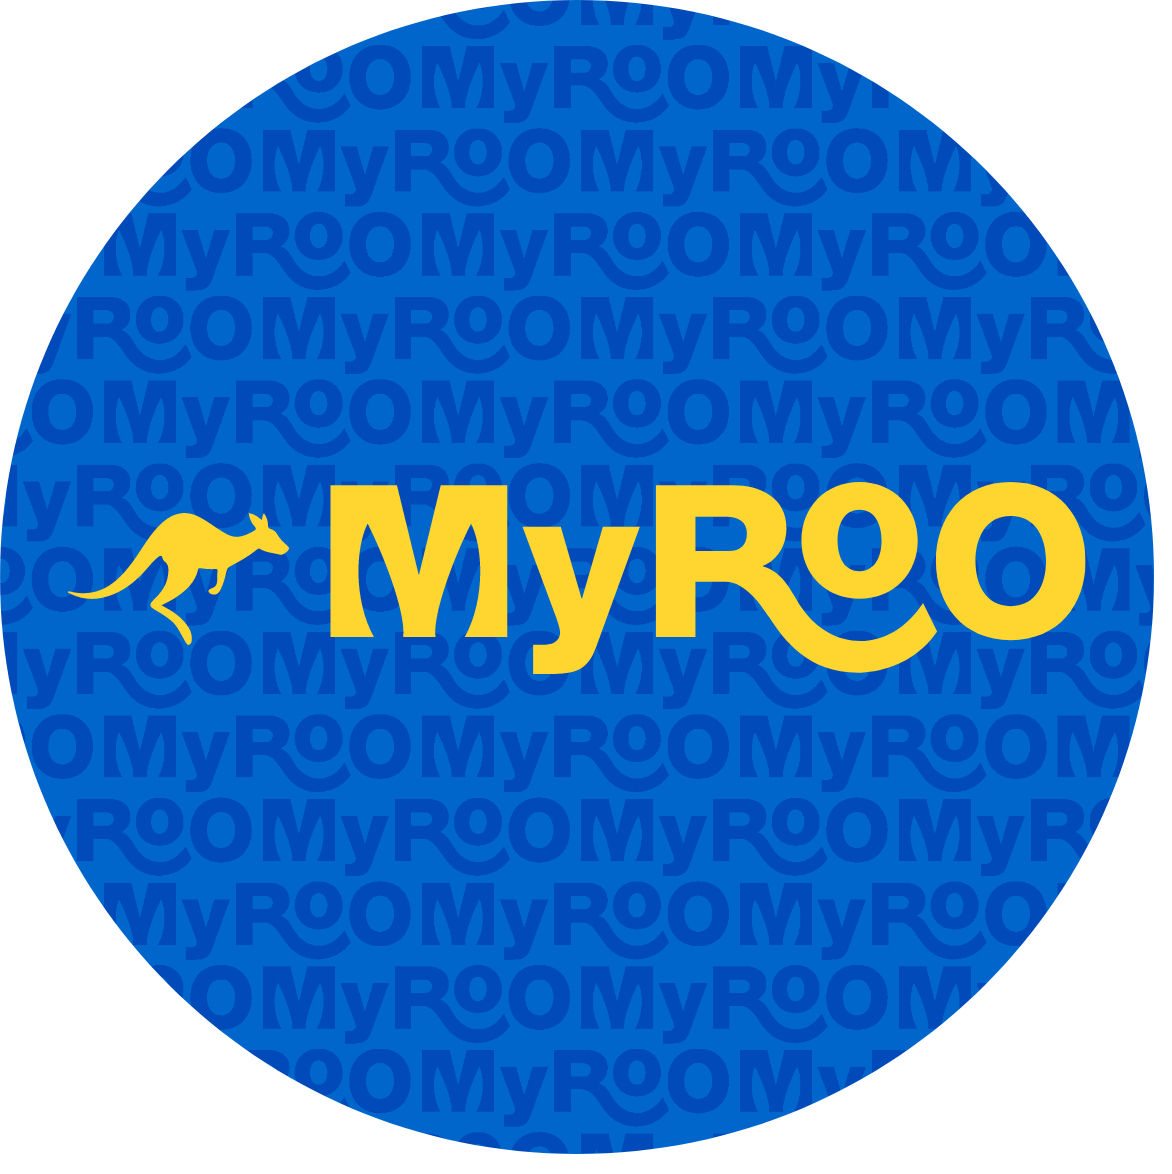 MyRoo logo in gold against a blue background and a small gold kangaroo hopping next to it.